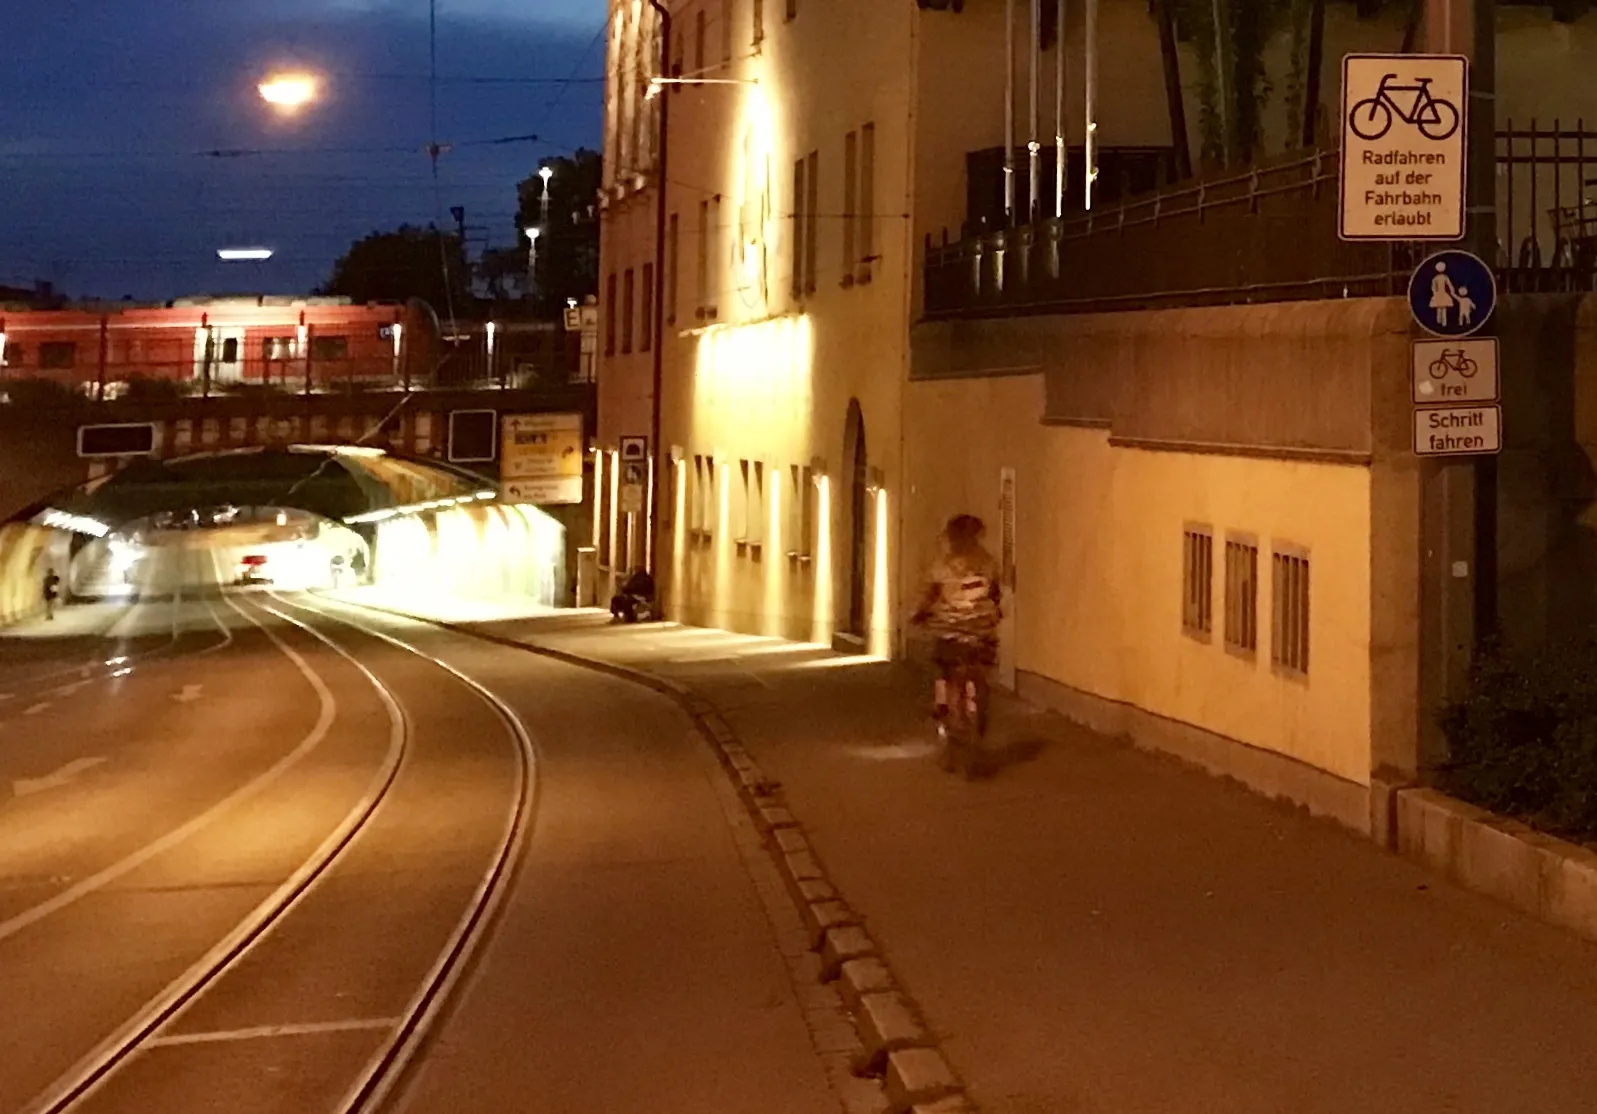 Photo showing: Cycling in Bavaria, street with tram-line-tracks under railway line near Augsburg main station with some people walking on the sidewalk. Building of a brewery (Riegele) in blue hour colors. At that time (2019, evening) not much traffic with cars.